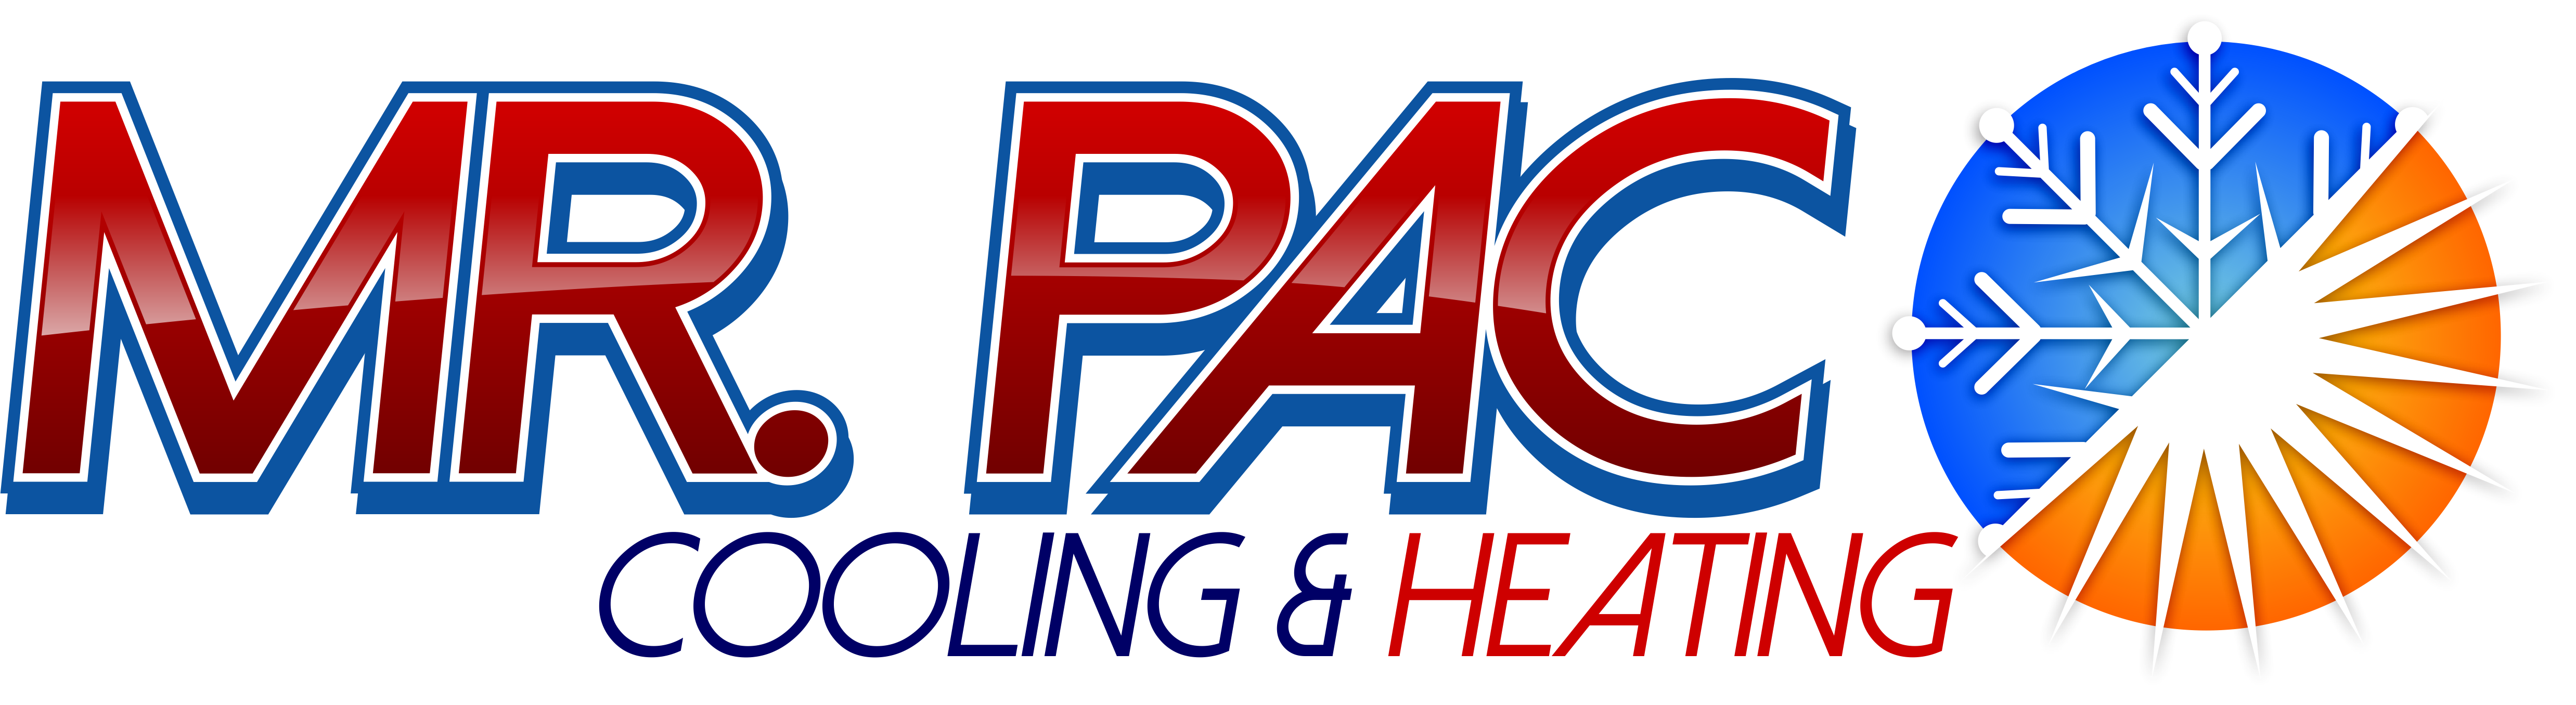 MR. PAC COOLING AND HEATING     logo